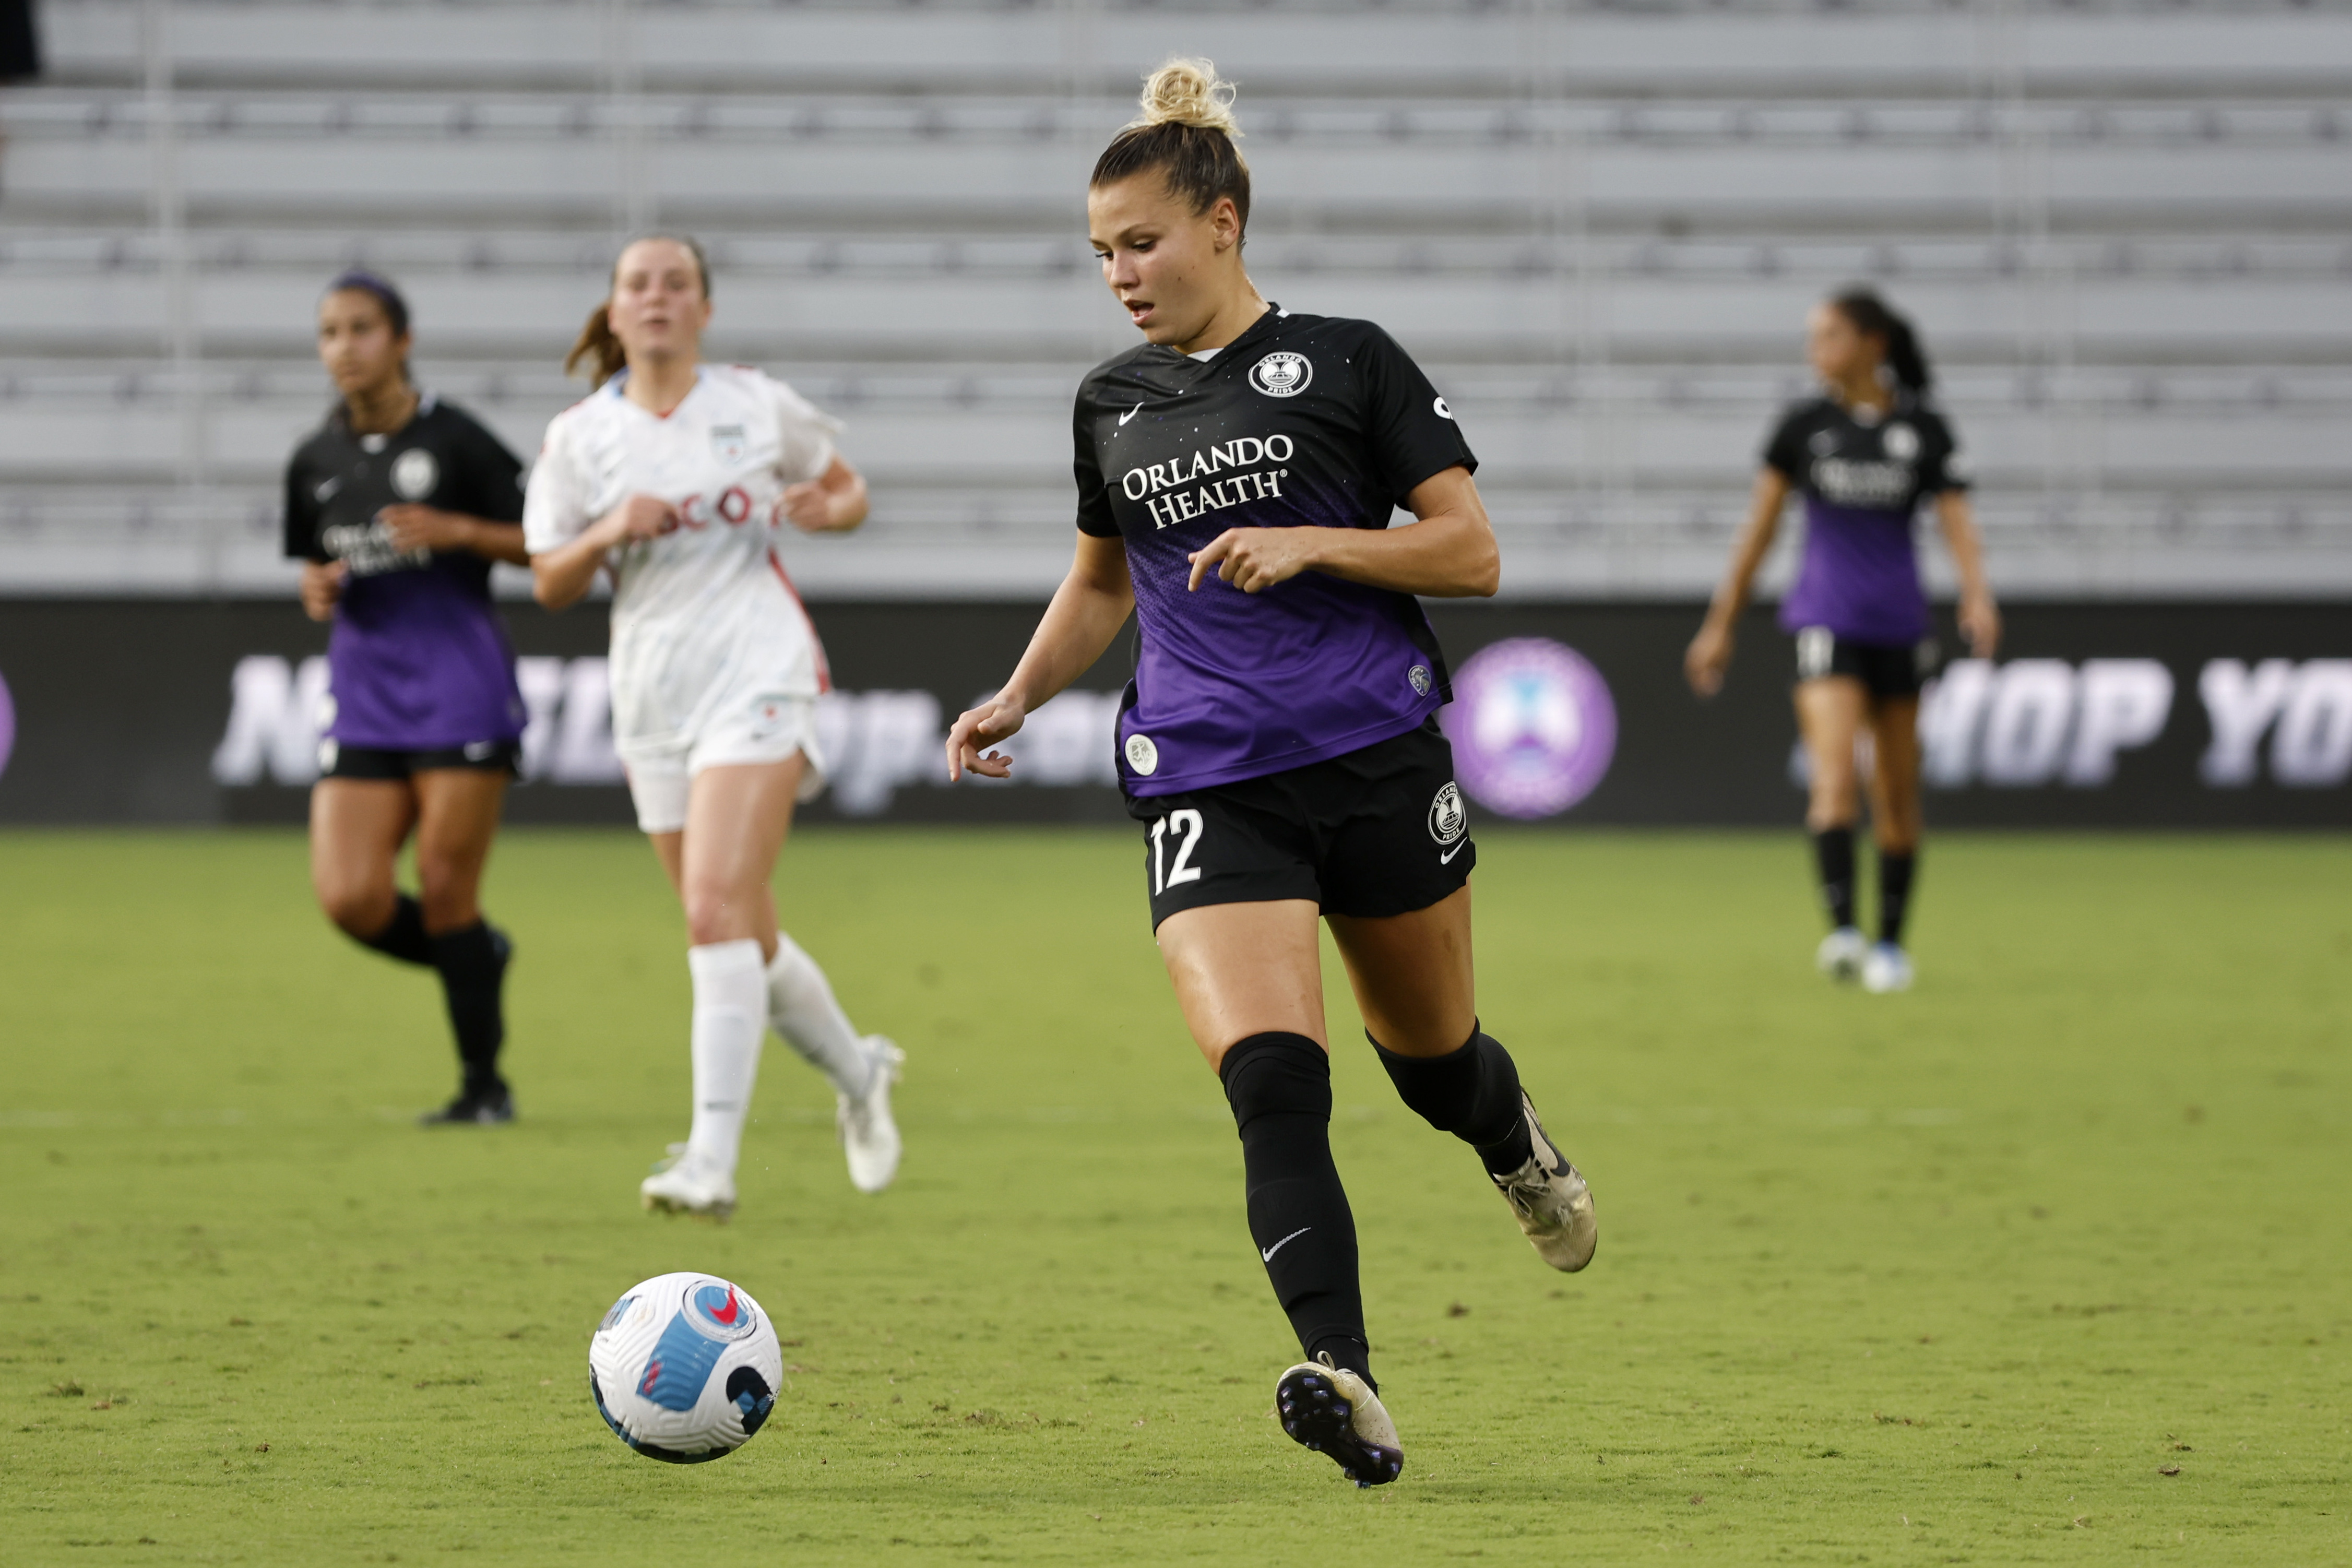 NWSL: Chicago Red Stars at Orlando Pride